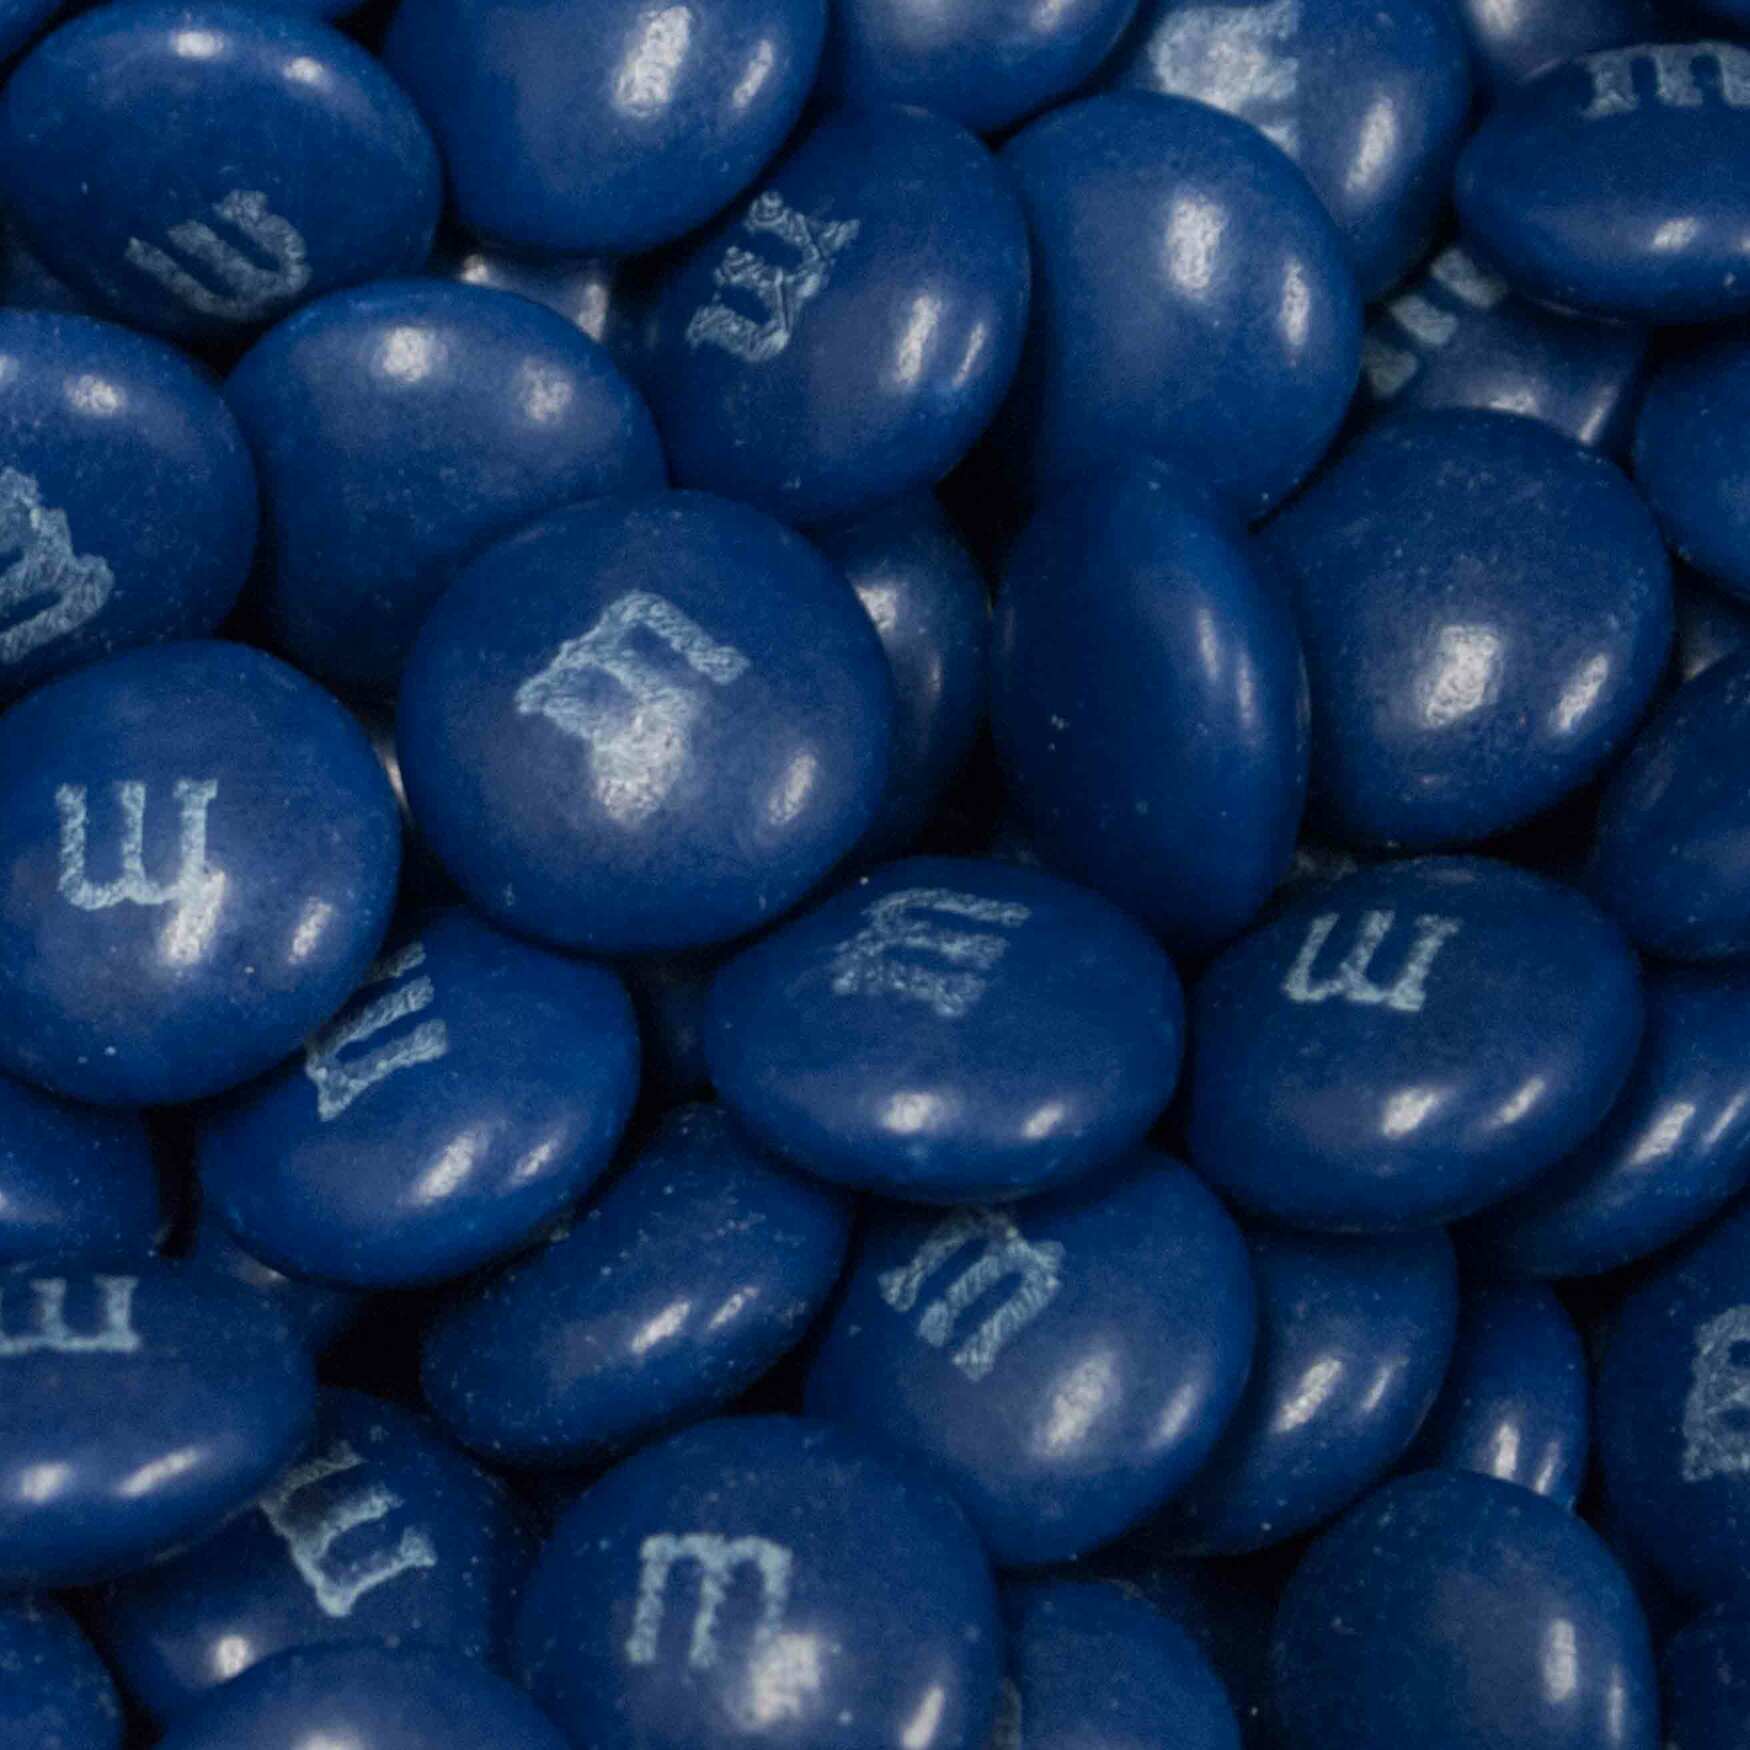 blue m&m package